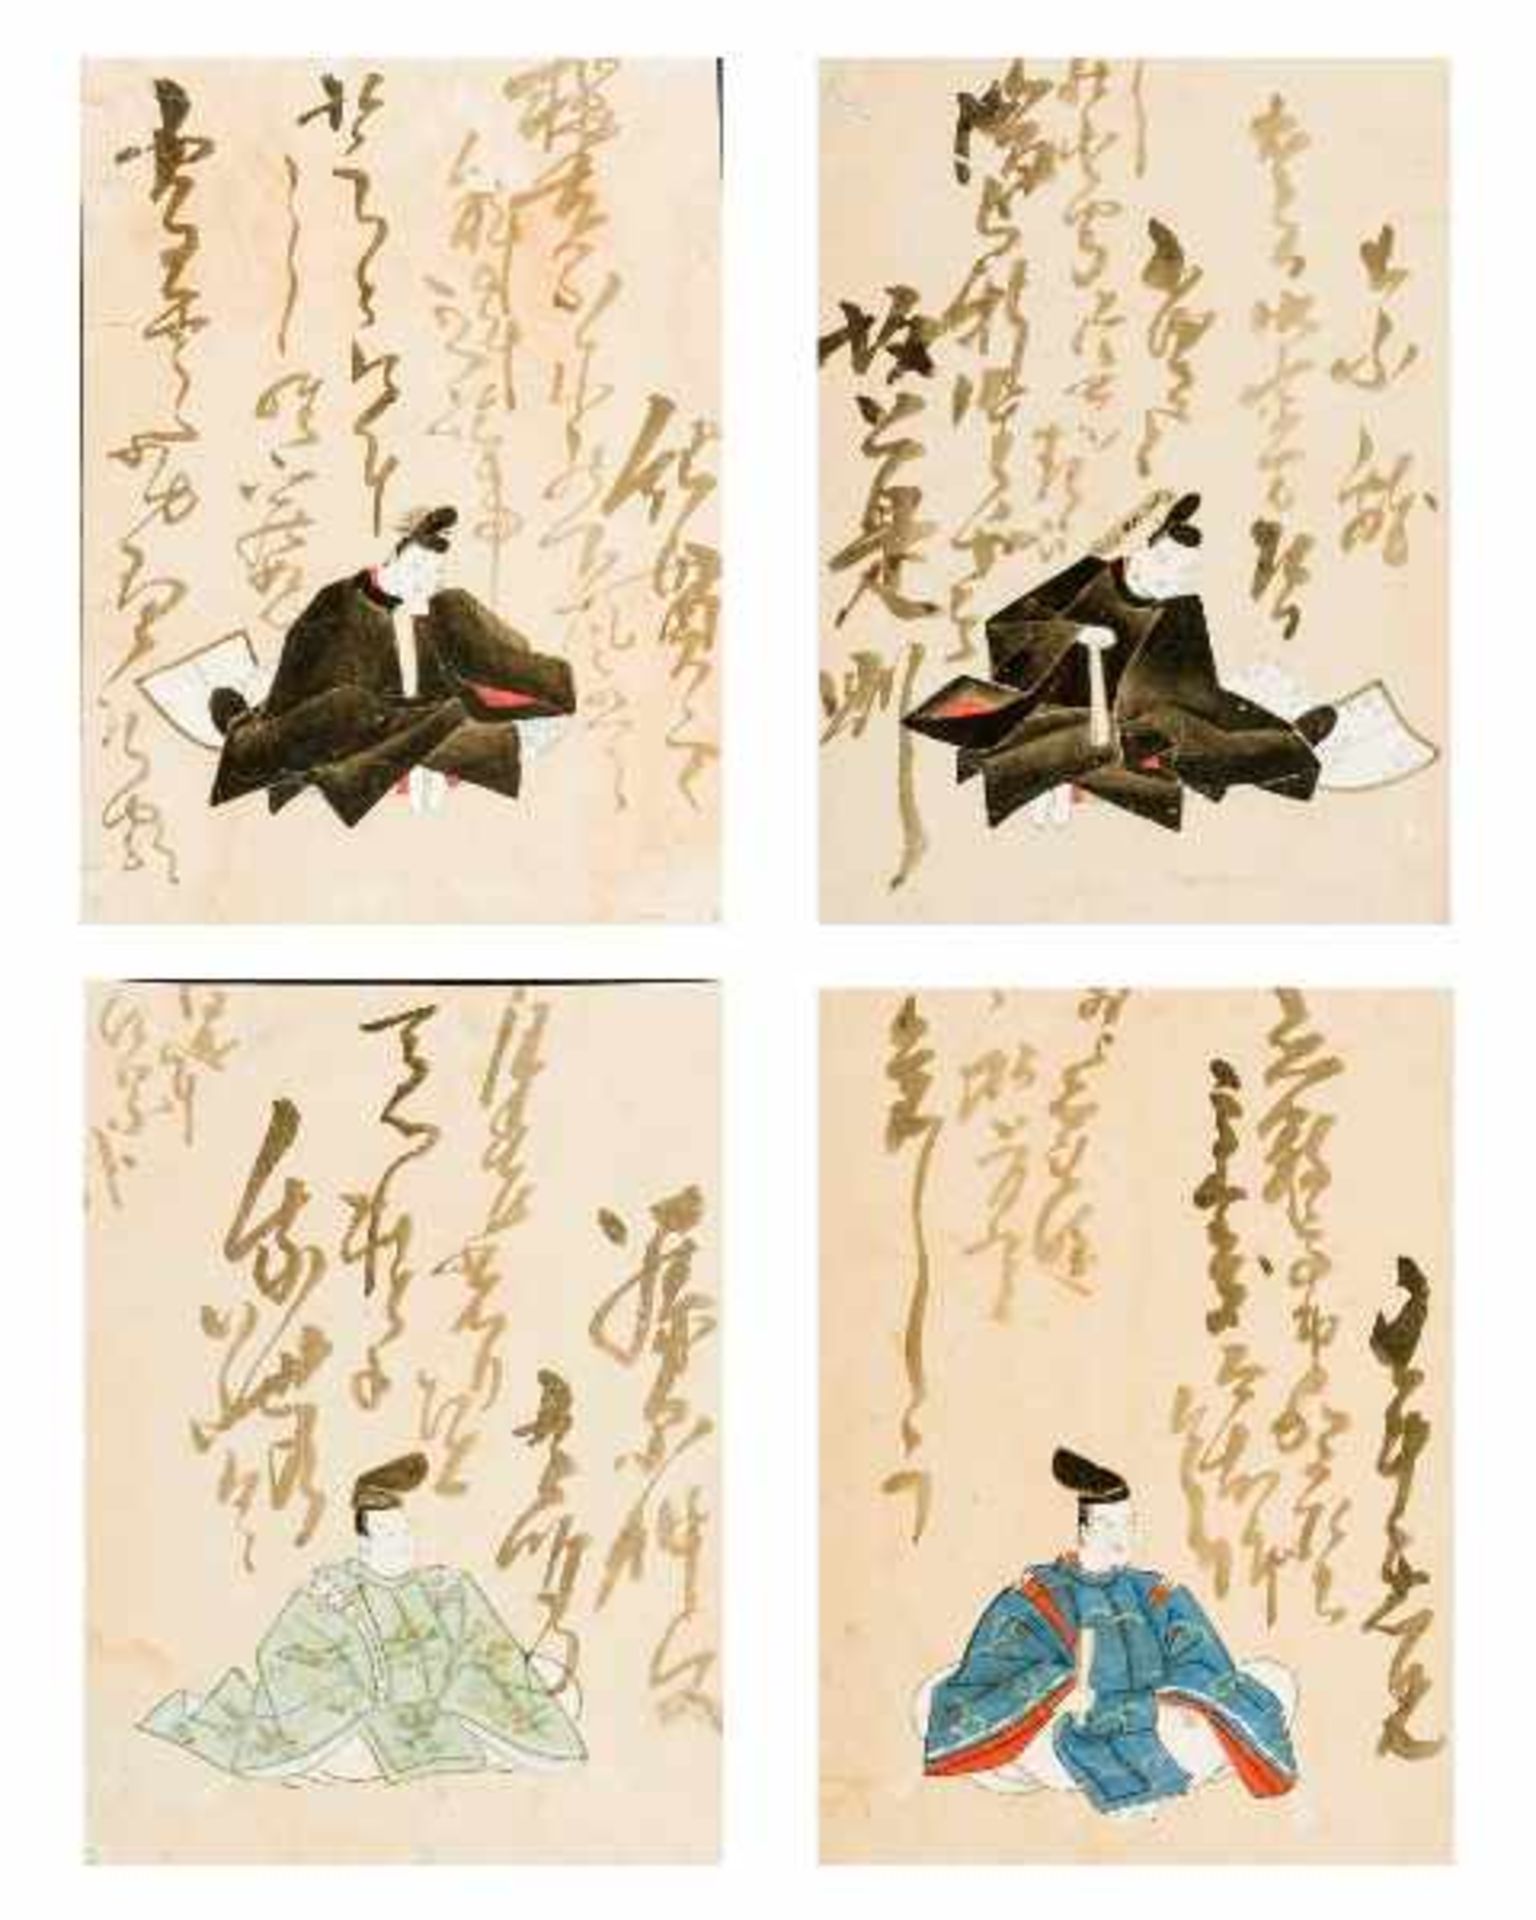 UNKNOWN ARTIST FROM THE 17TH CENT. Four sheets from a Hyakunin Isshu. Hand painted and inscribed